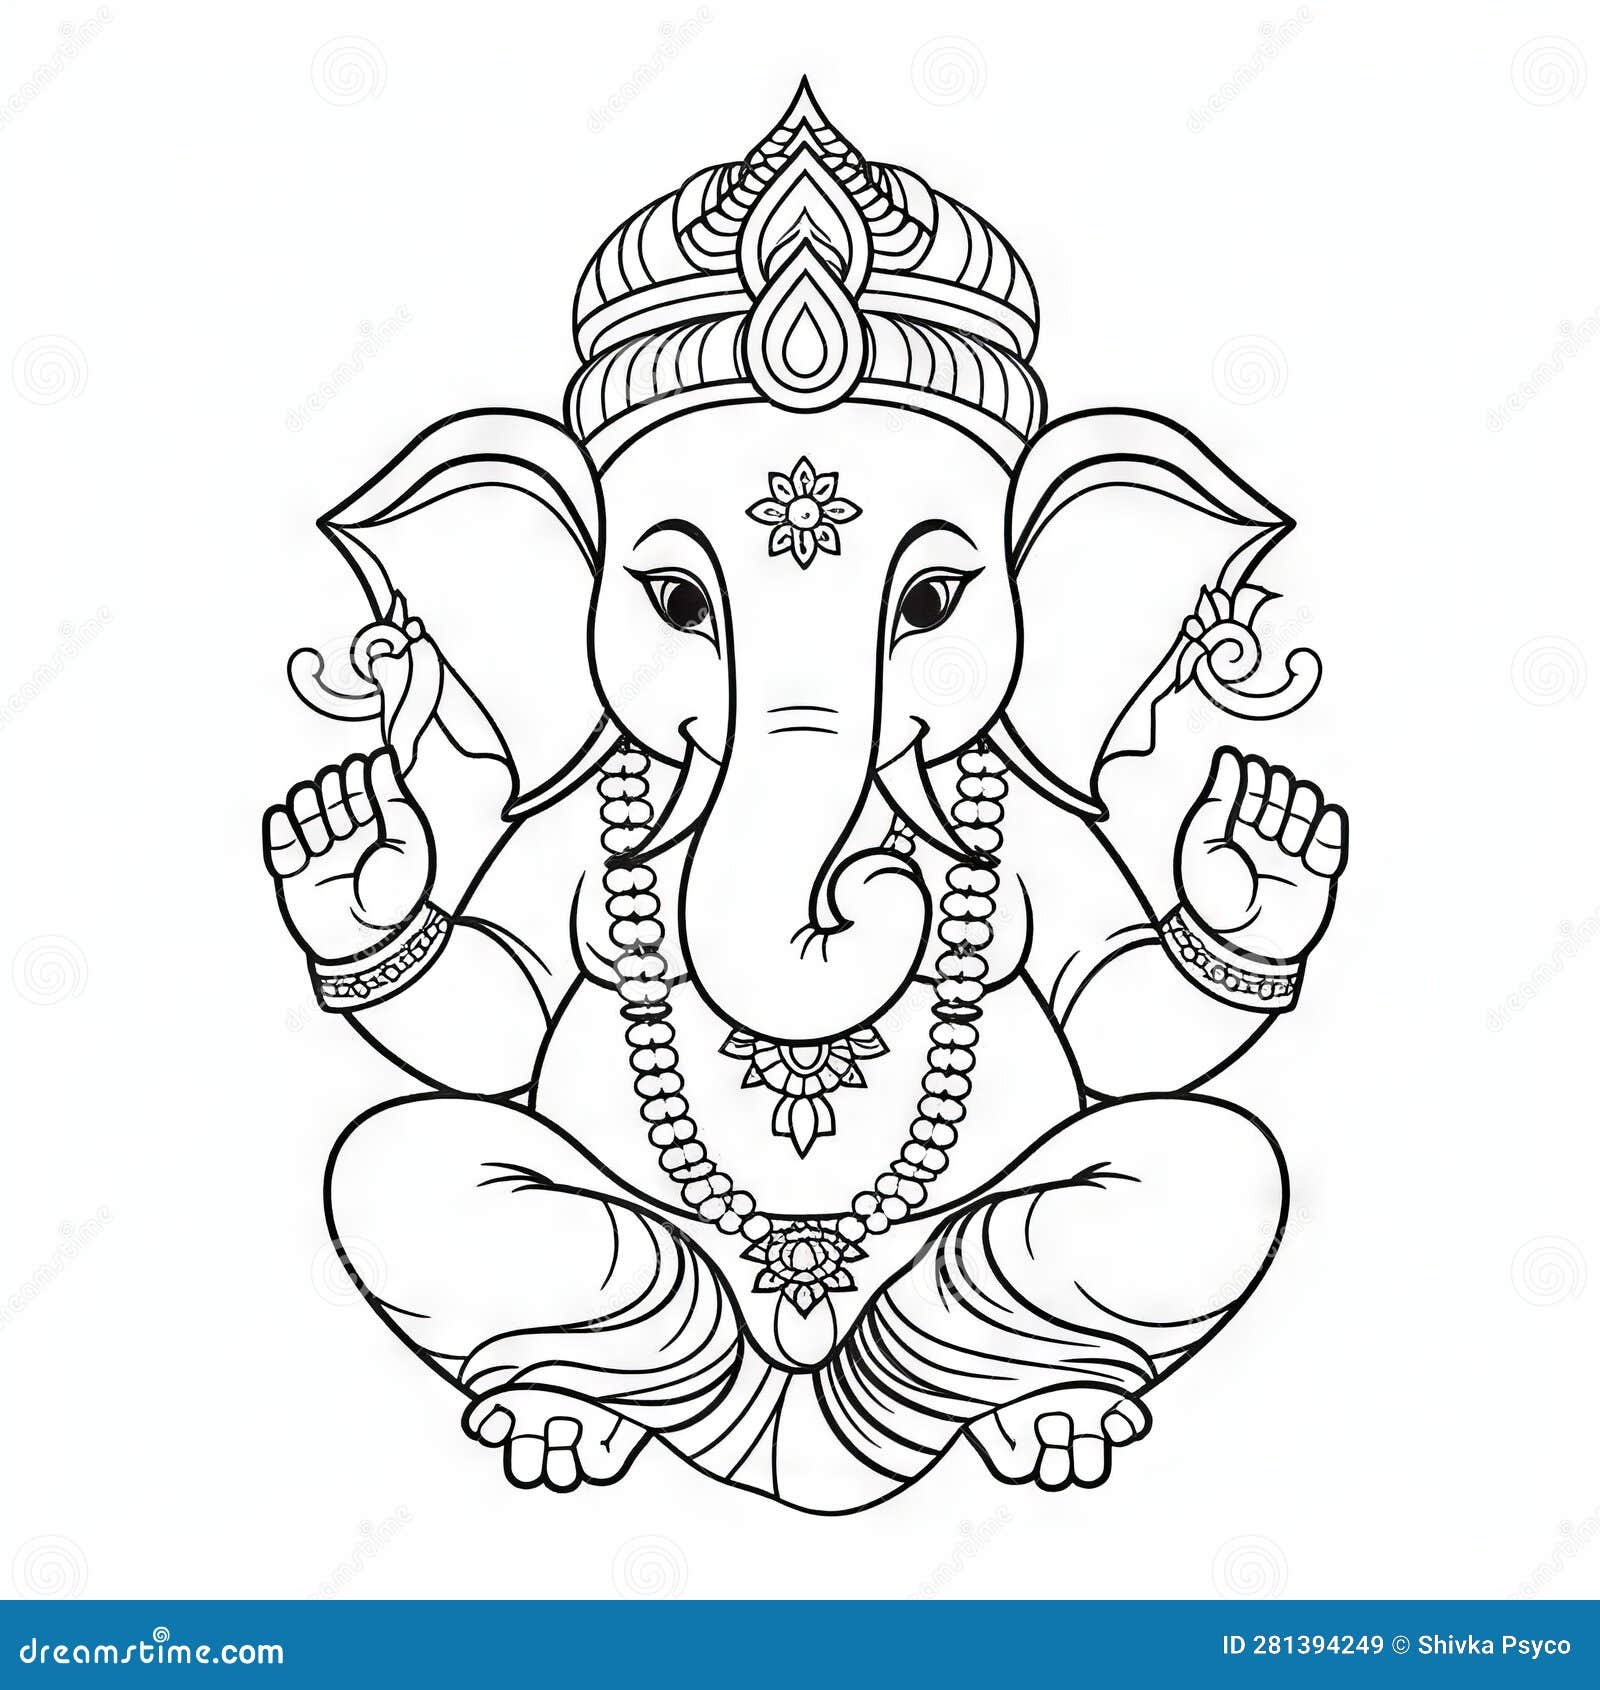 Easy Ganesh Drawing in 1 Minute - Unblocked quick draw 2021 (EASY !) -  YouTube